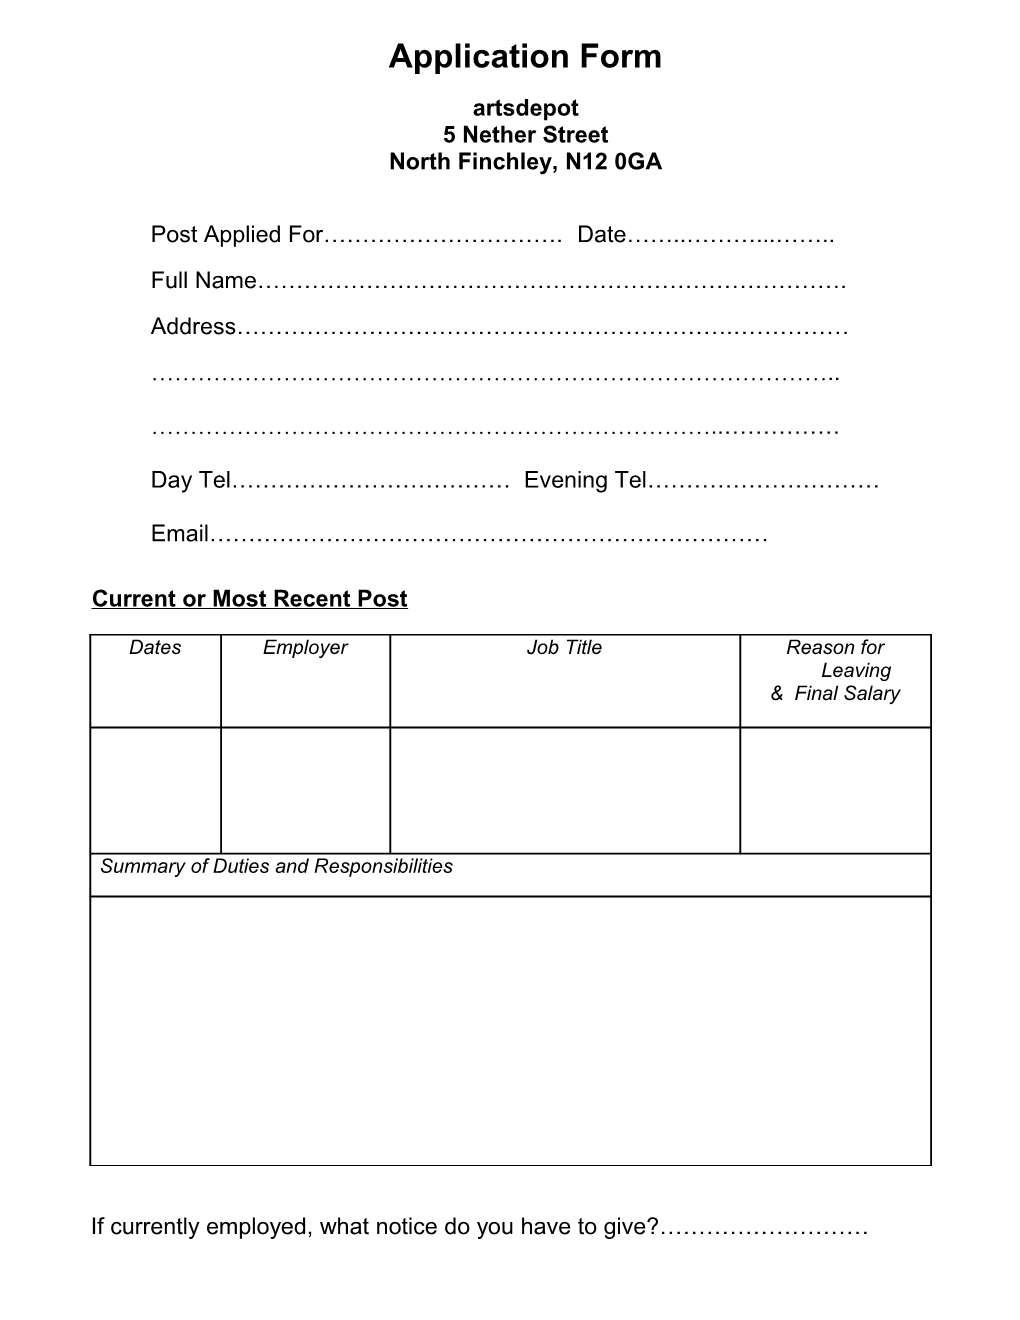 Application Form s95